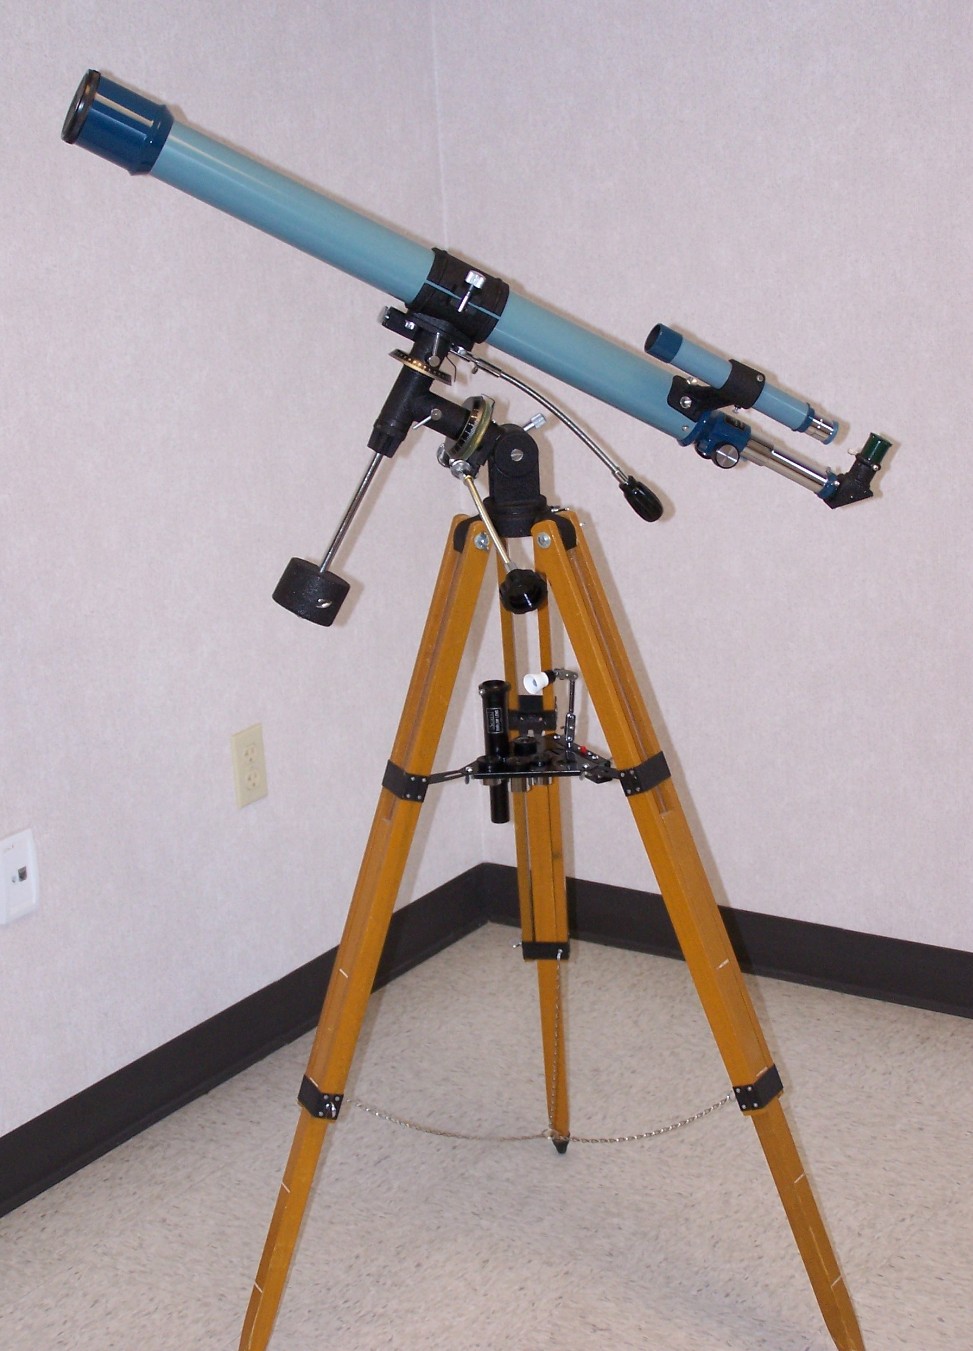 Vintage Sears Tower or Discoverer Telescopes - Page 3 - Classic 